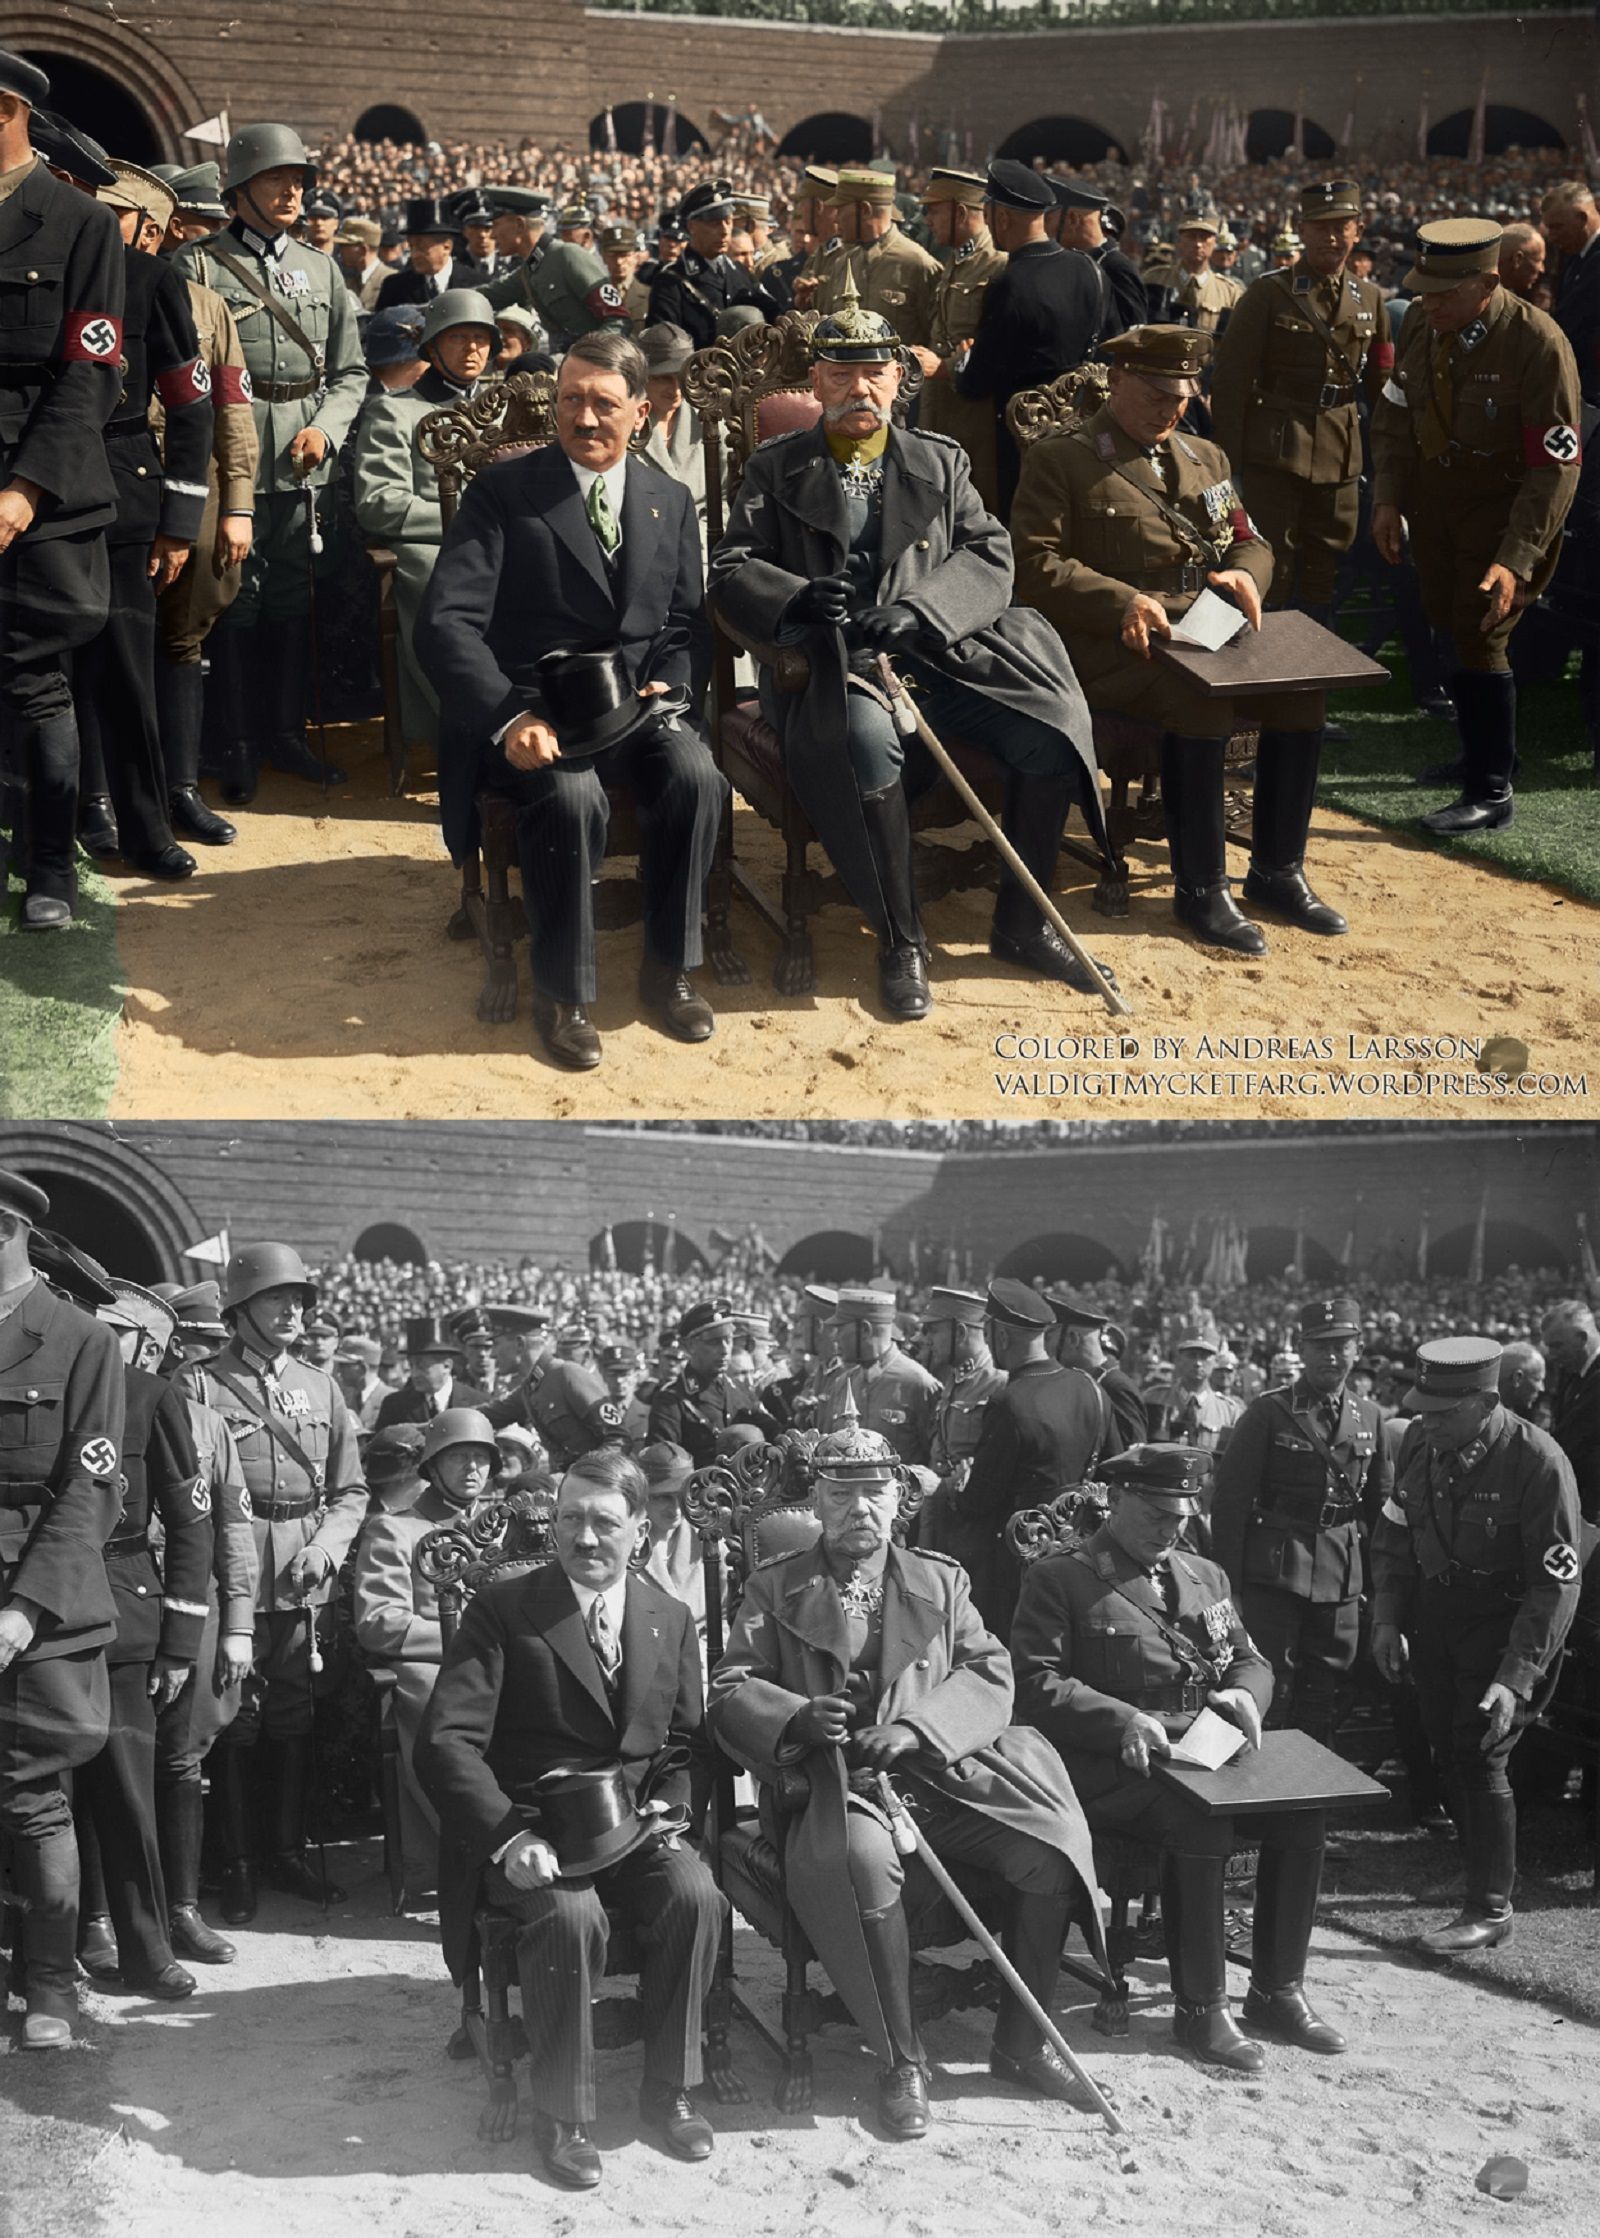 Colourised photos from history image 82